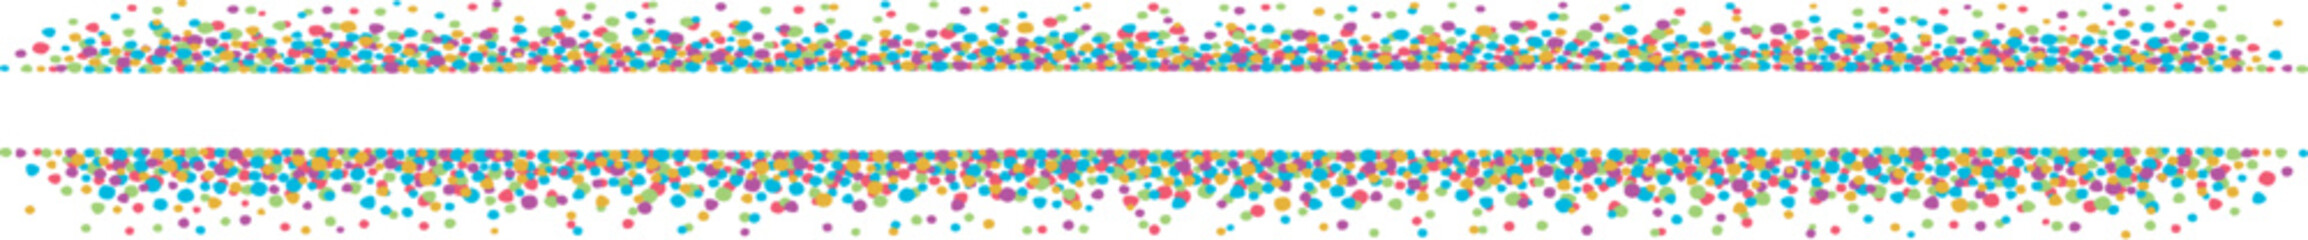 Colorful border with two lines with small dots. A border to use as a separator, made with random and irregular colored dots.